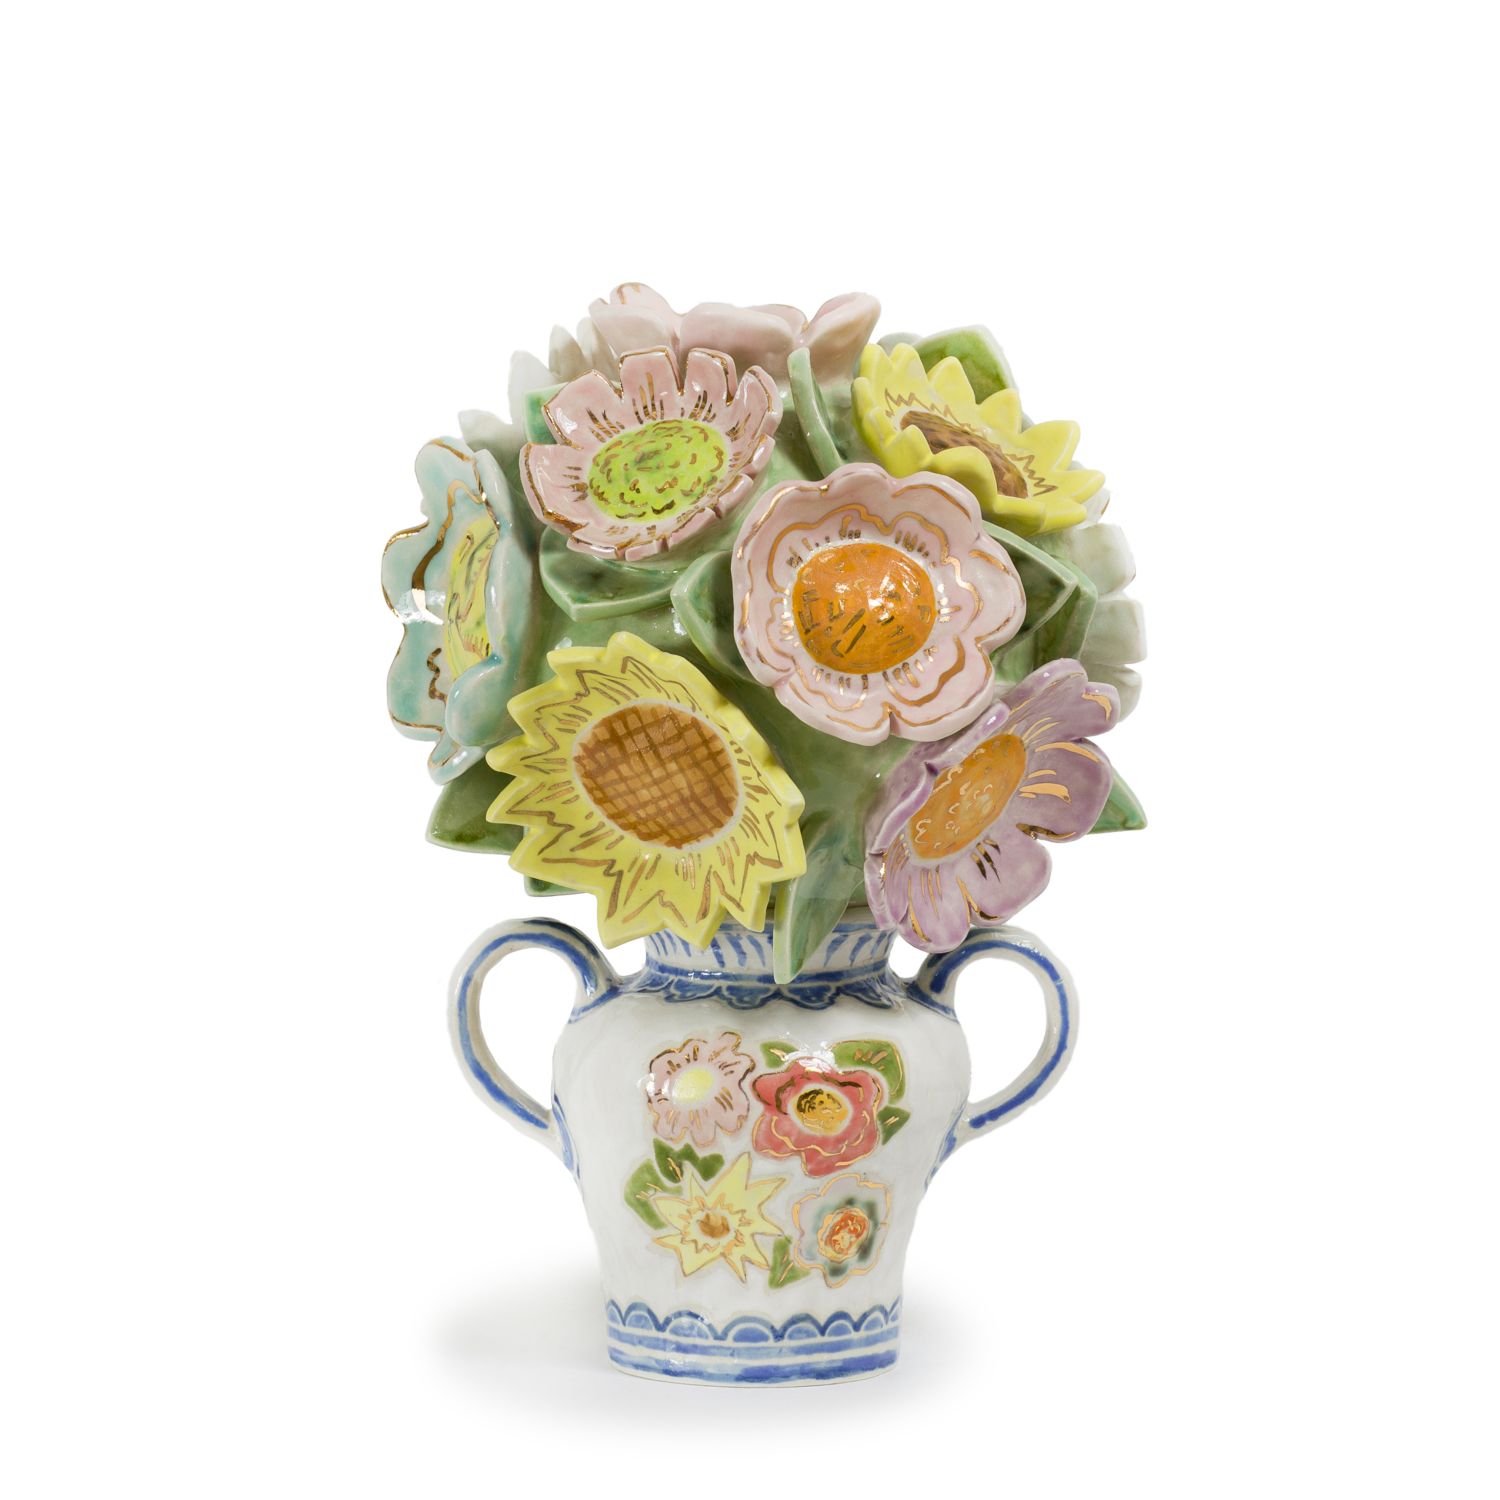 Julie Moon: Mini Bouquet with Gold Lustre Product Image 1 of 1